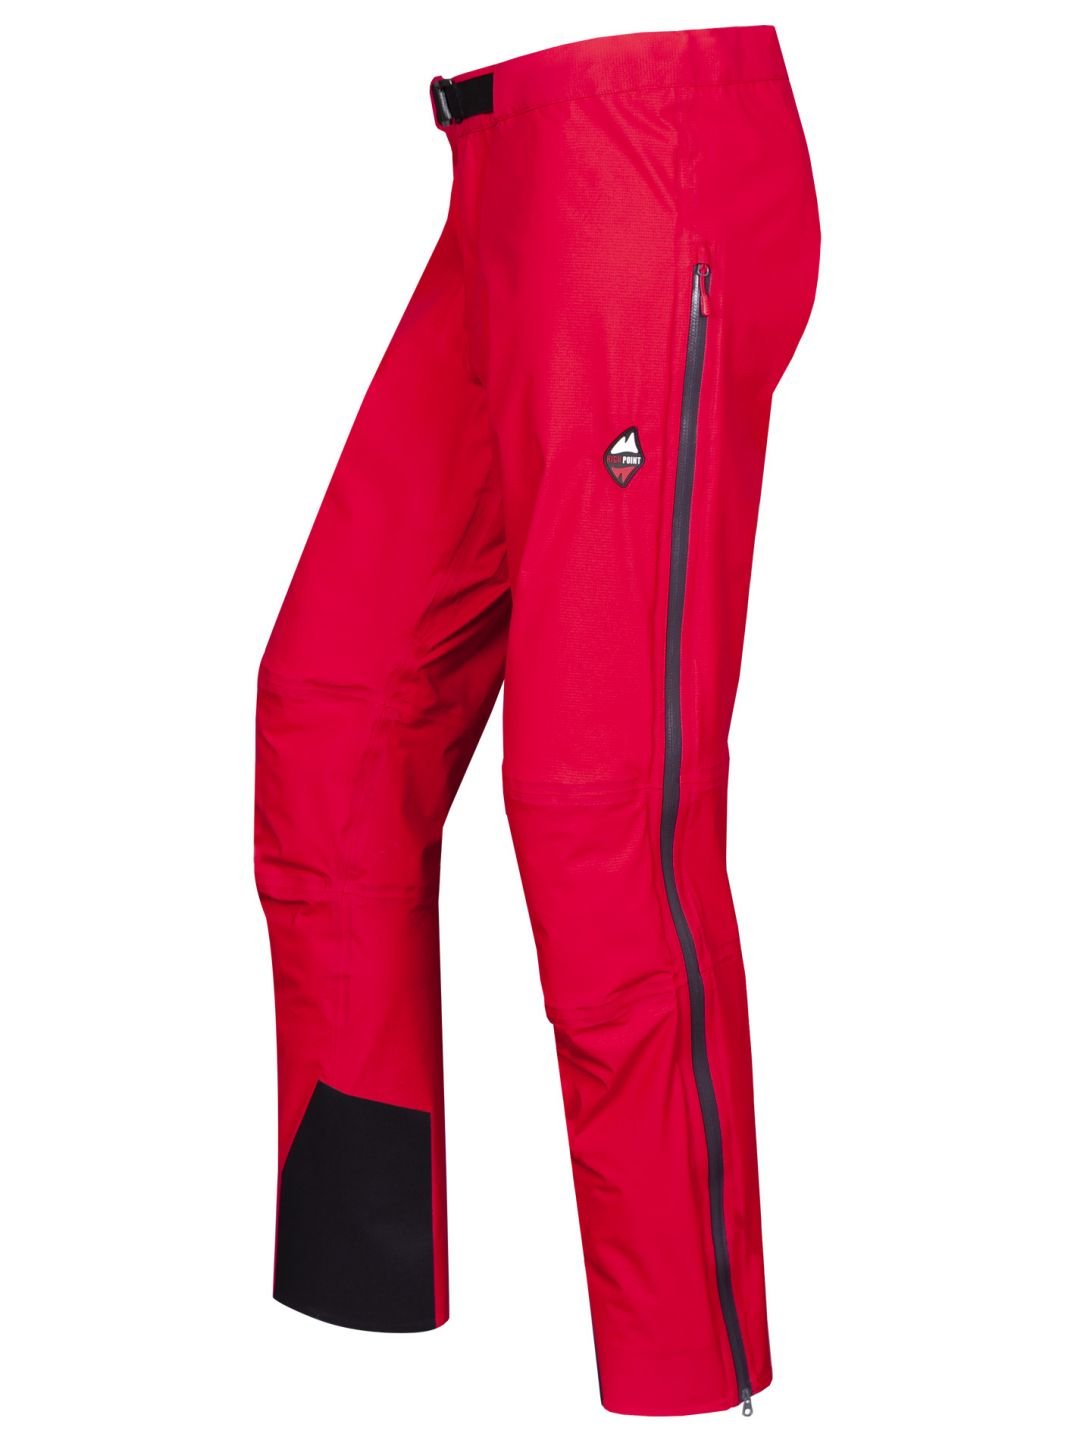 HIGH POINT Cliff Pants foto 1